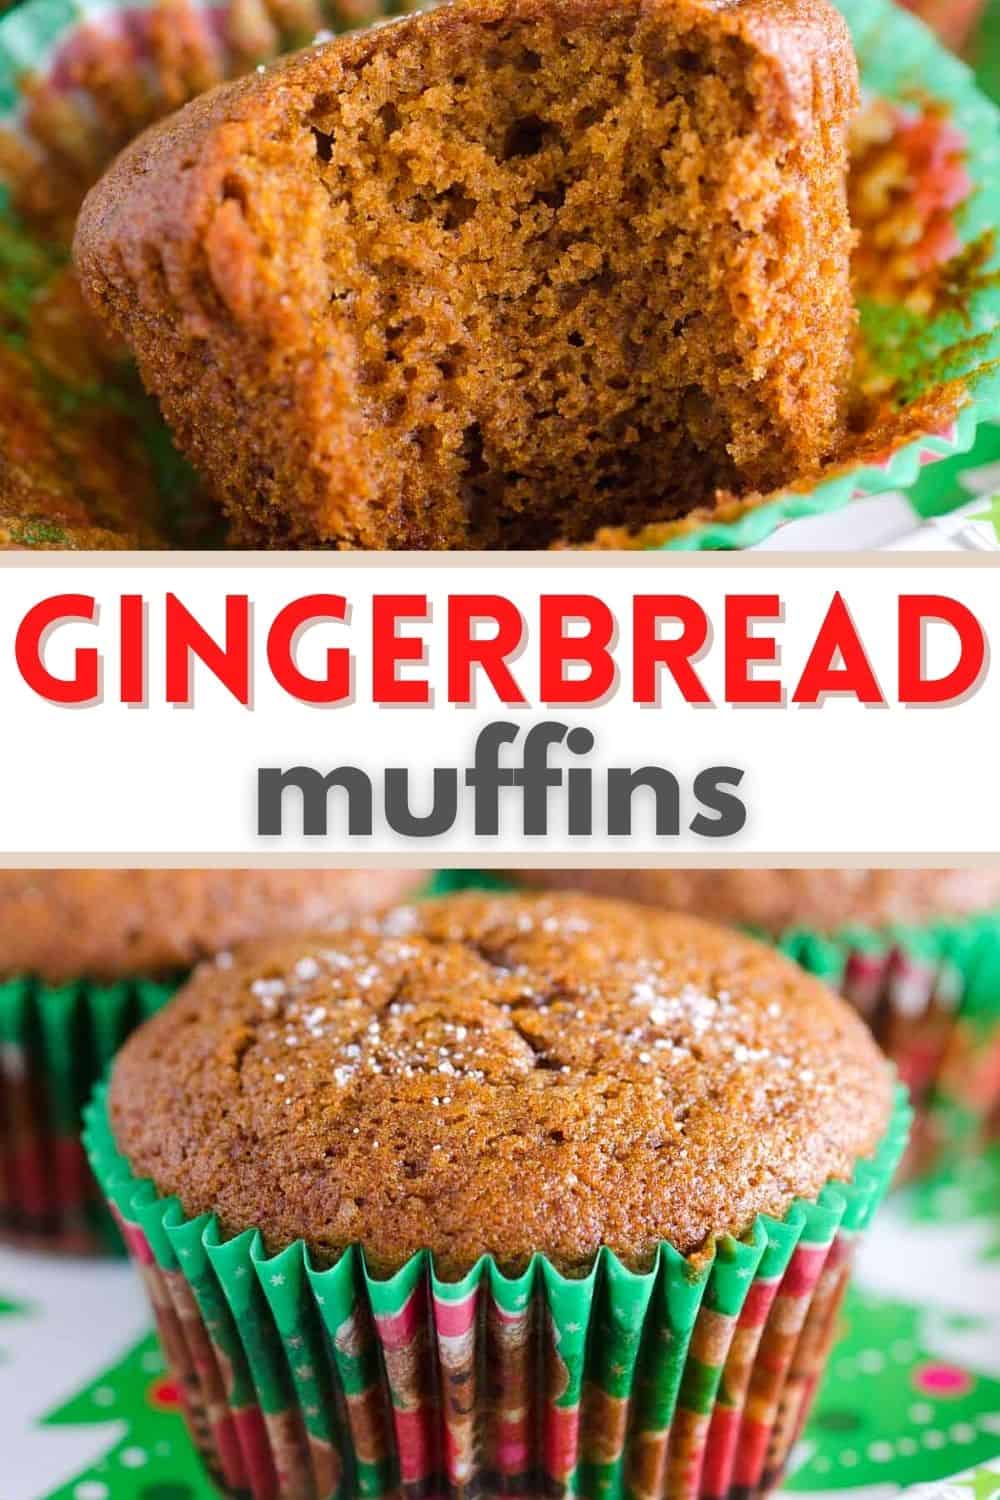 This easy gingerbread muffin recipe is perfect for holiday brunch or Christmas baskets.